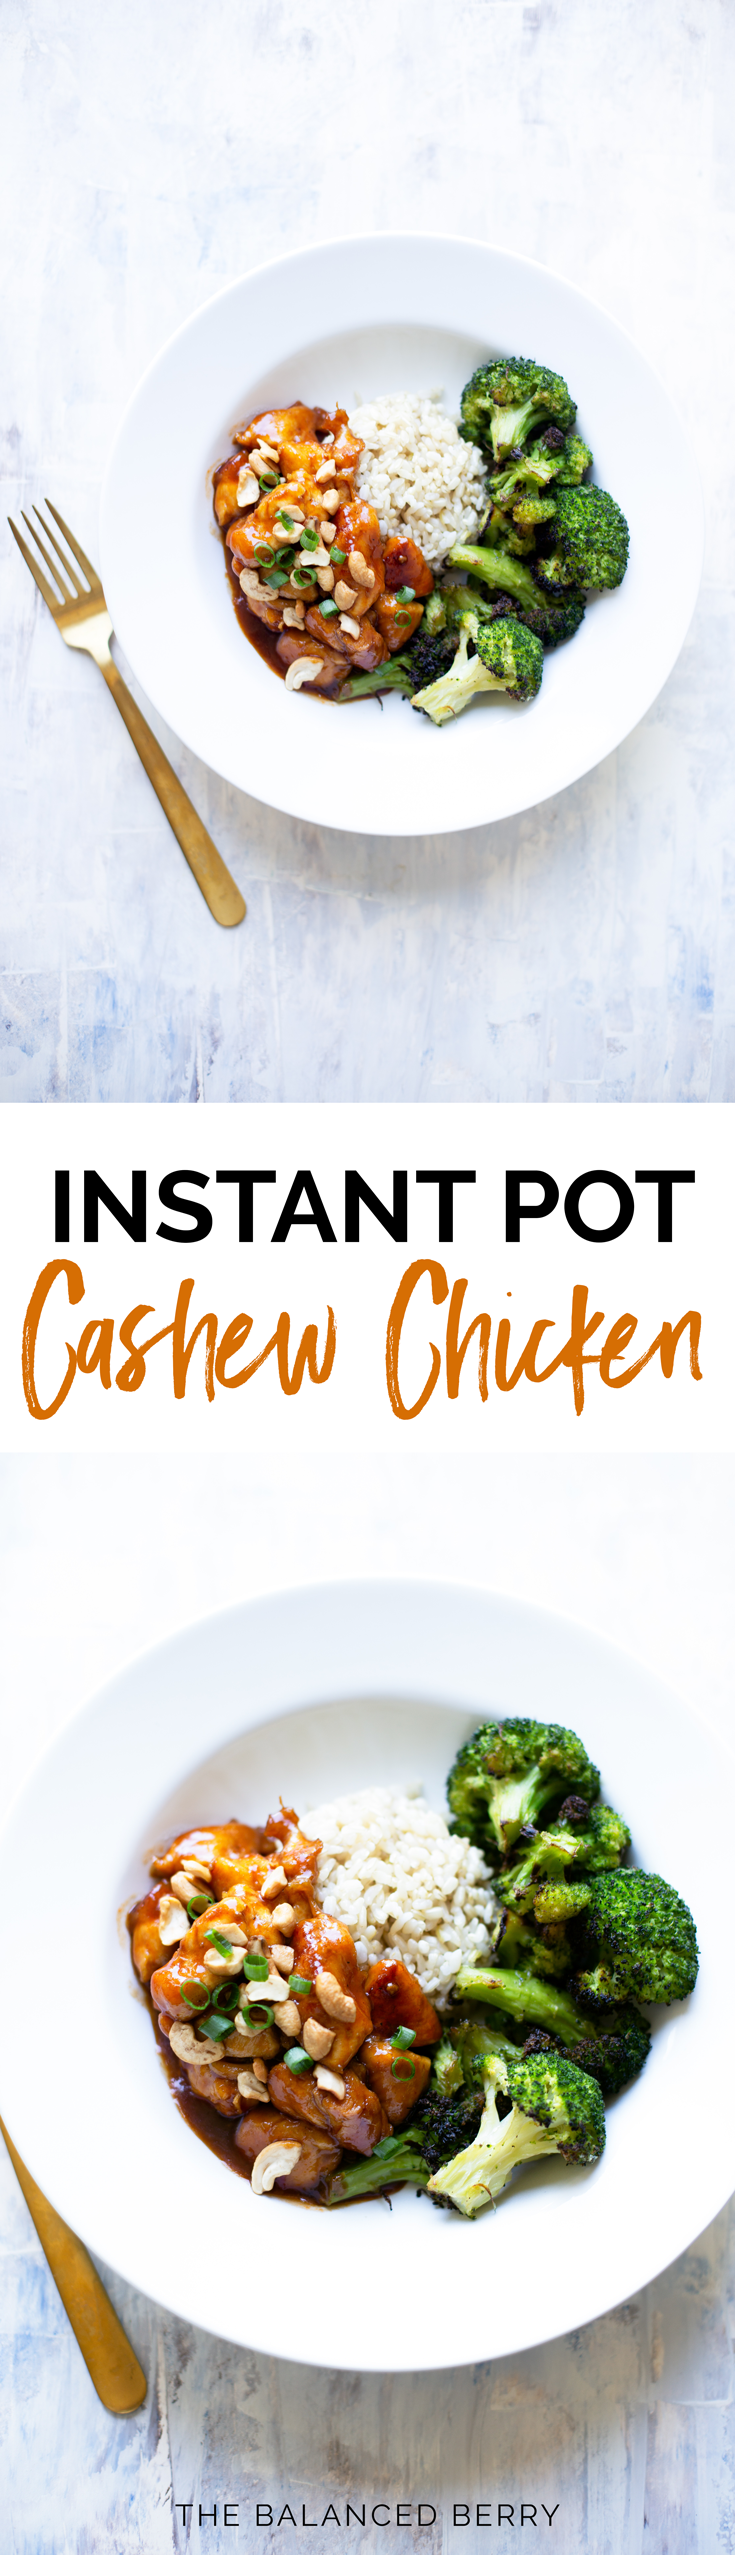 This Cashew Chicken Stir Fry is a delicious, healthy dinner that makes the ultimate 30-minute meal. Made completely in the Instant Pot, It’s also perfect for meal prep! #glutenfree #instantpot